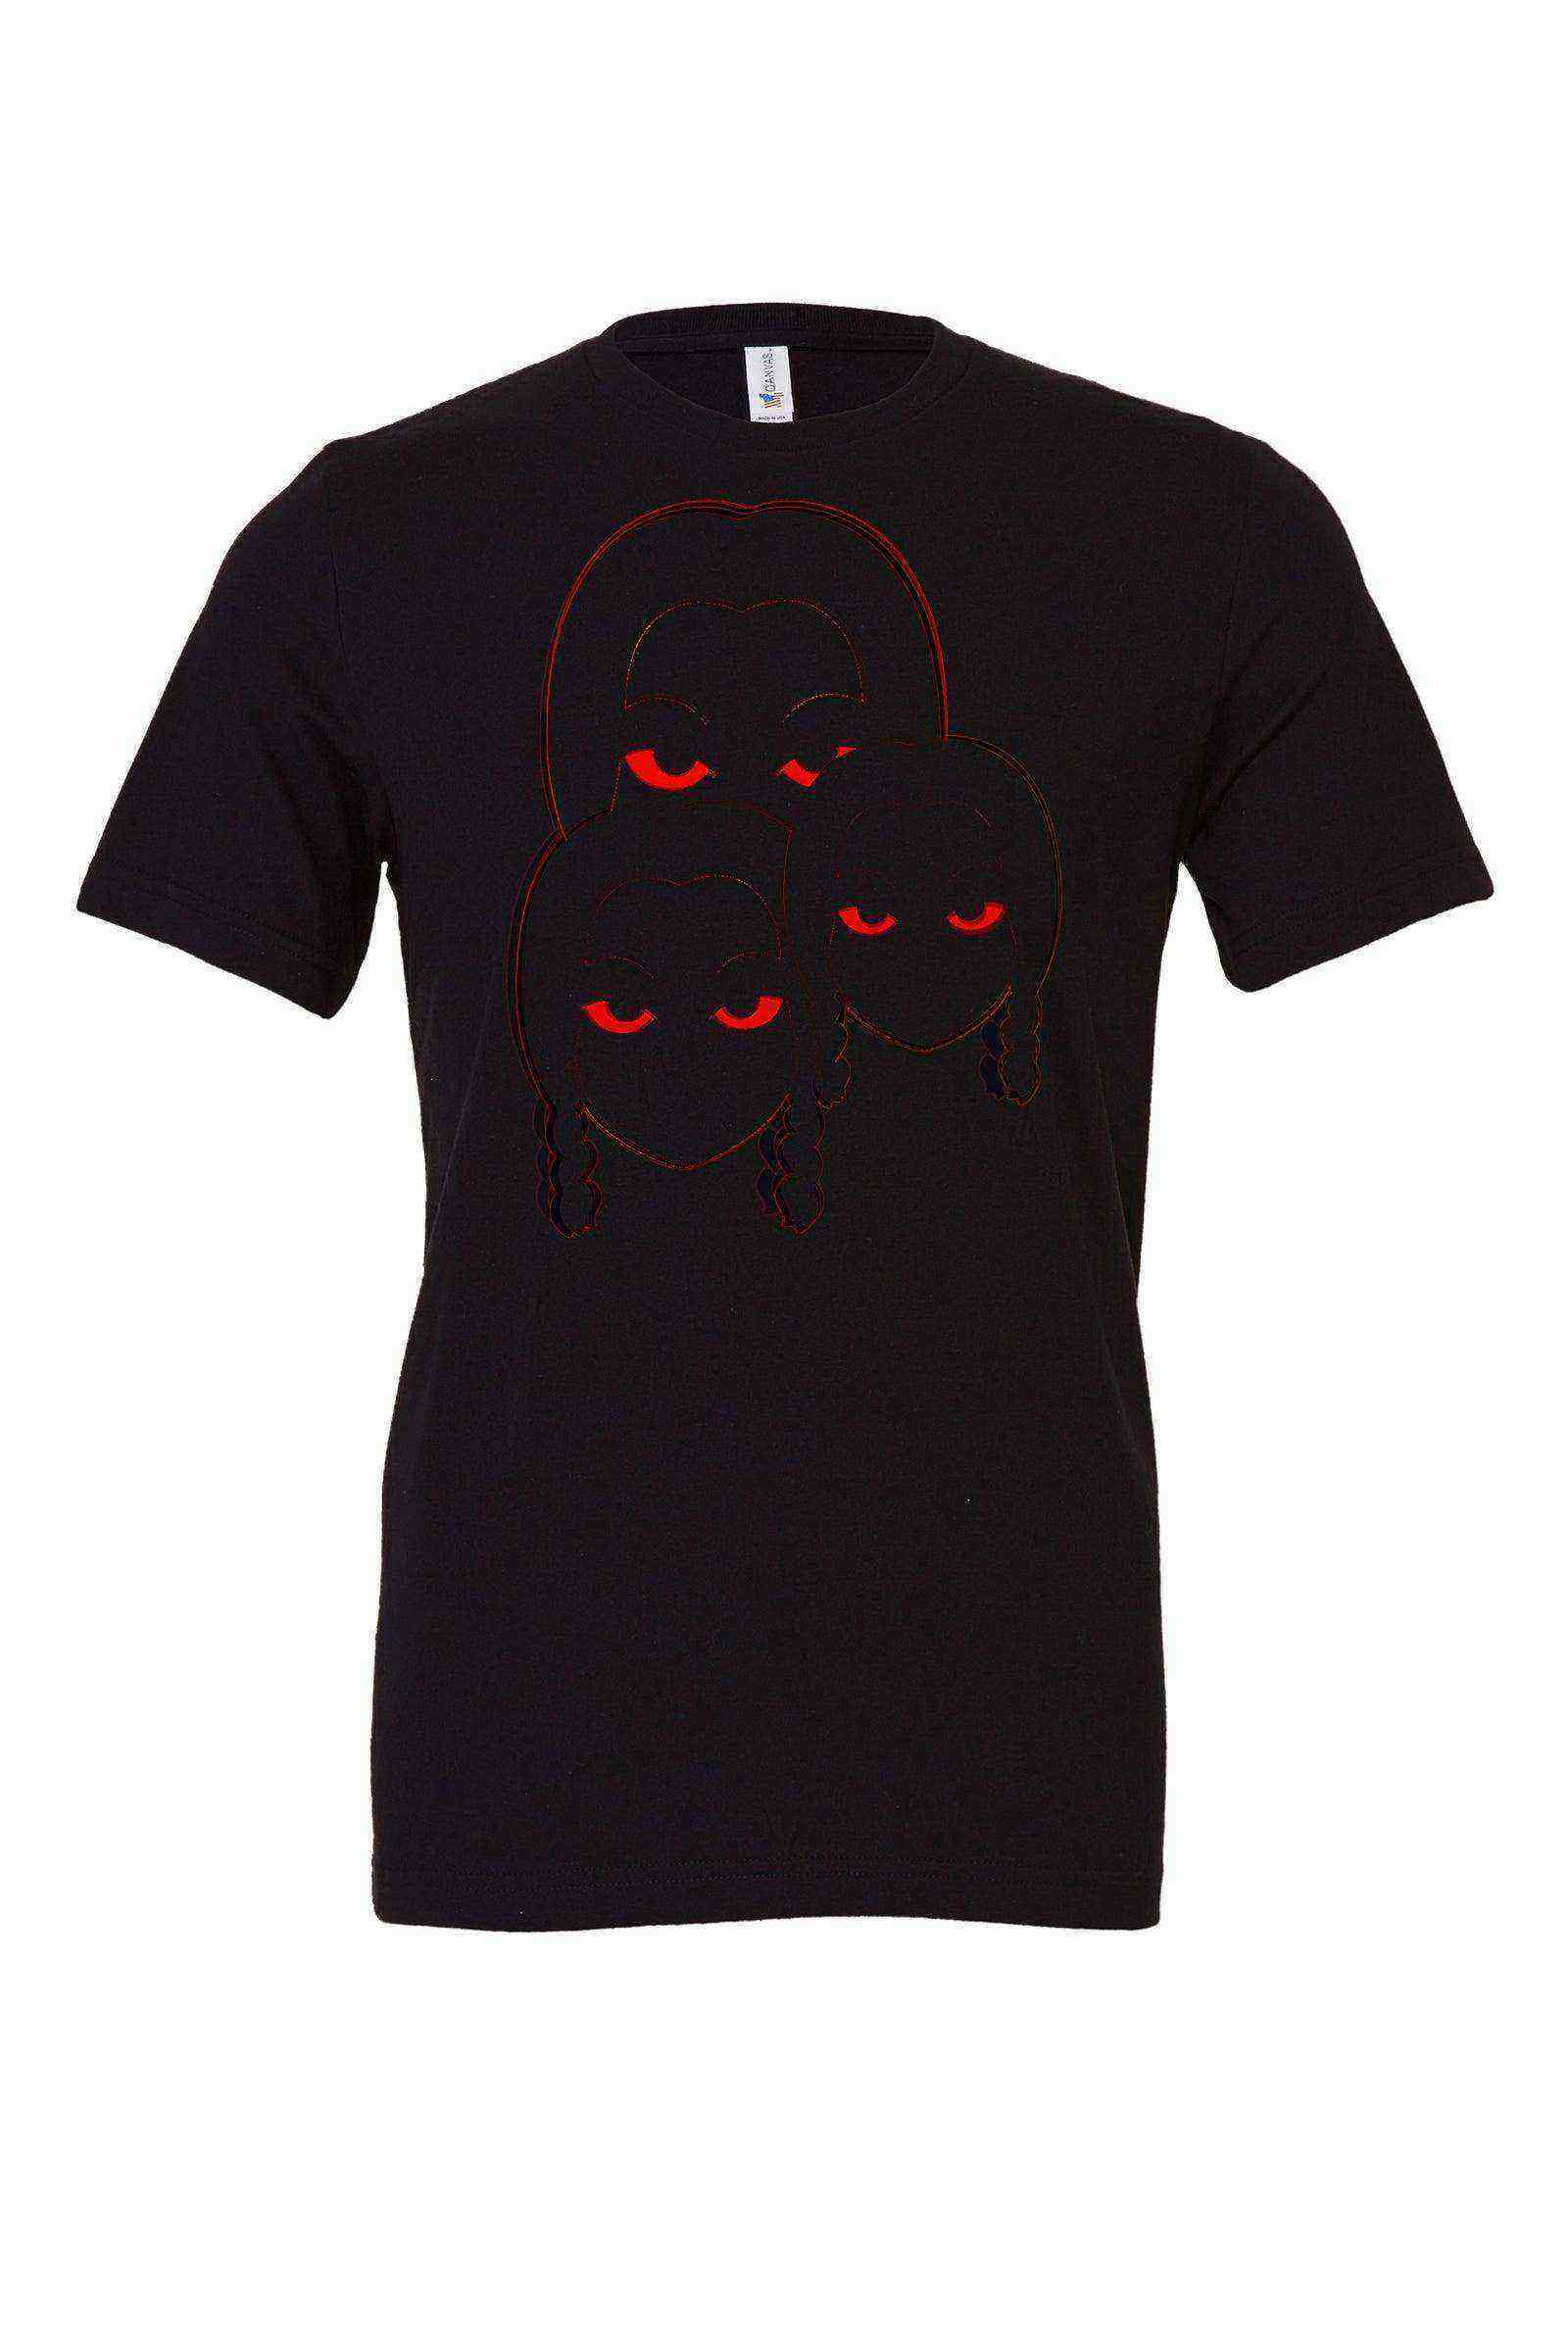 Creepy Wednesday Shirt | The Addams Shirt | Red Wednesday - Dylan's Tees